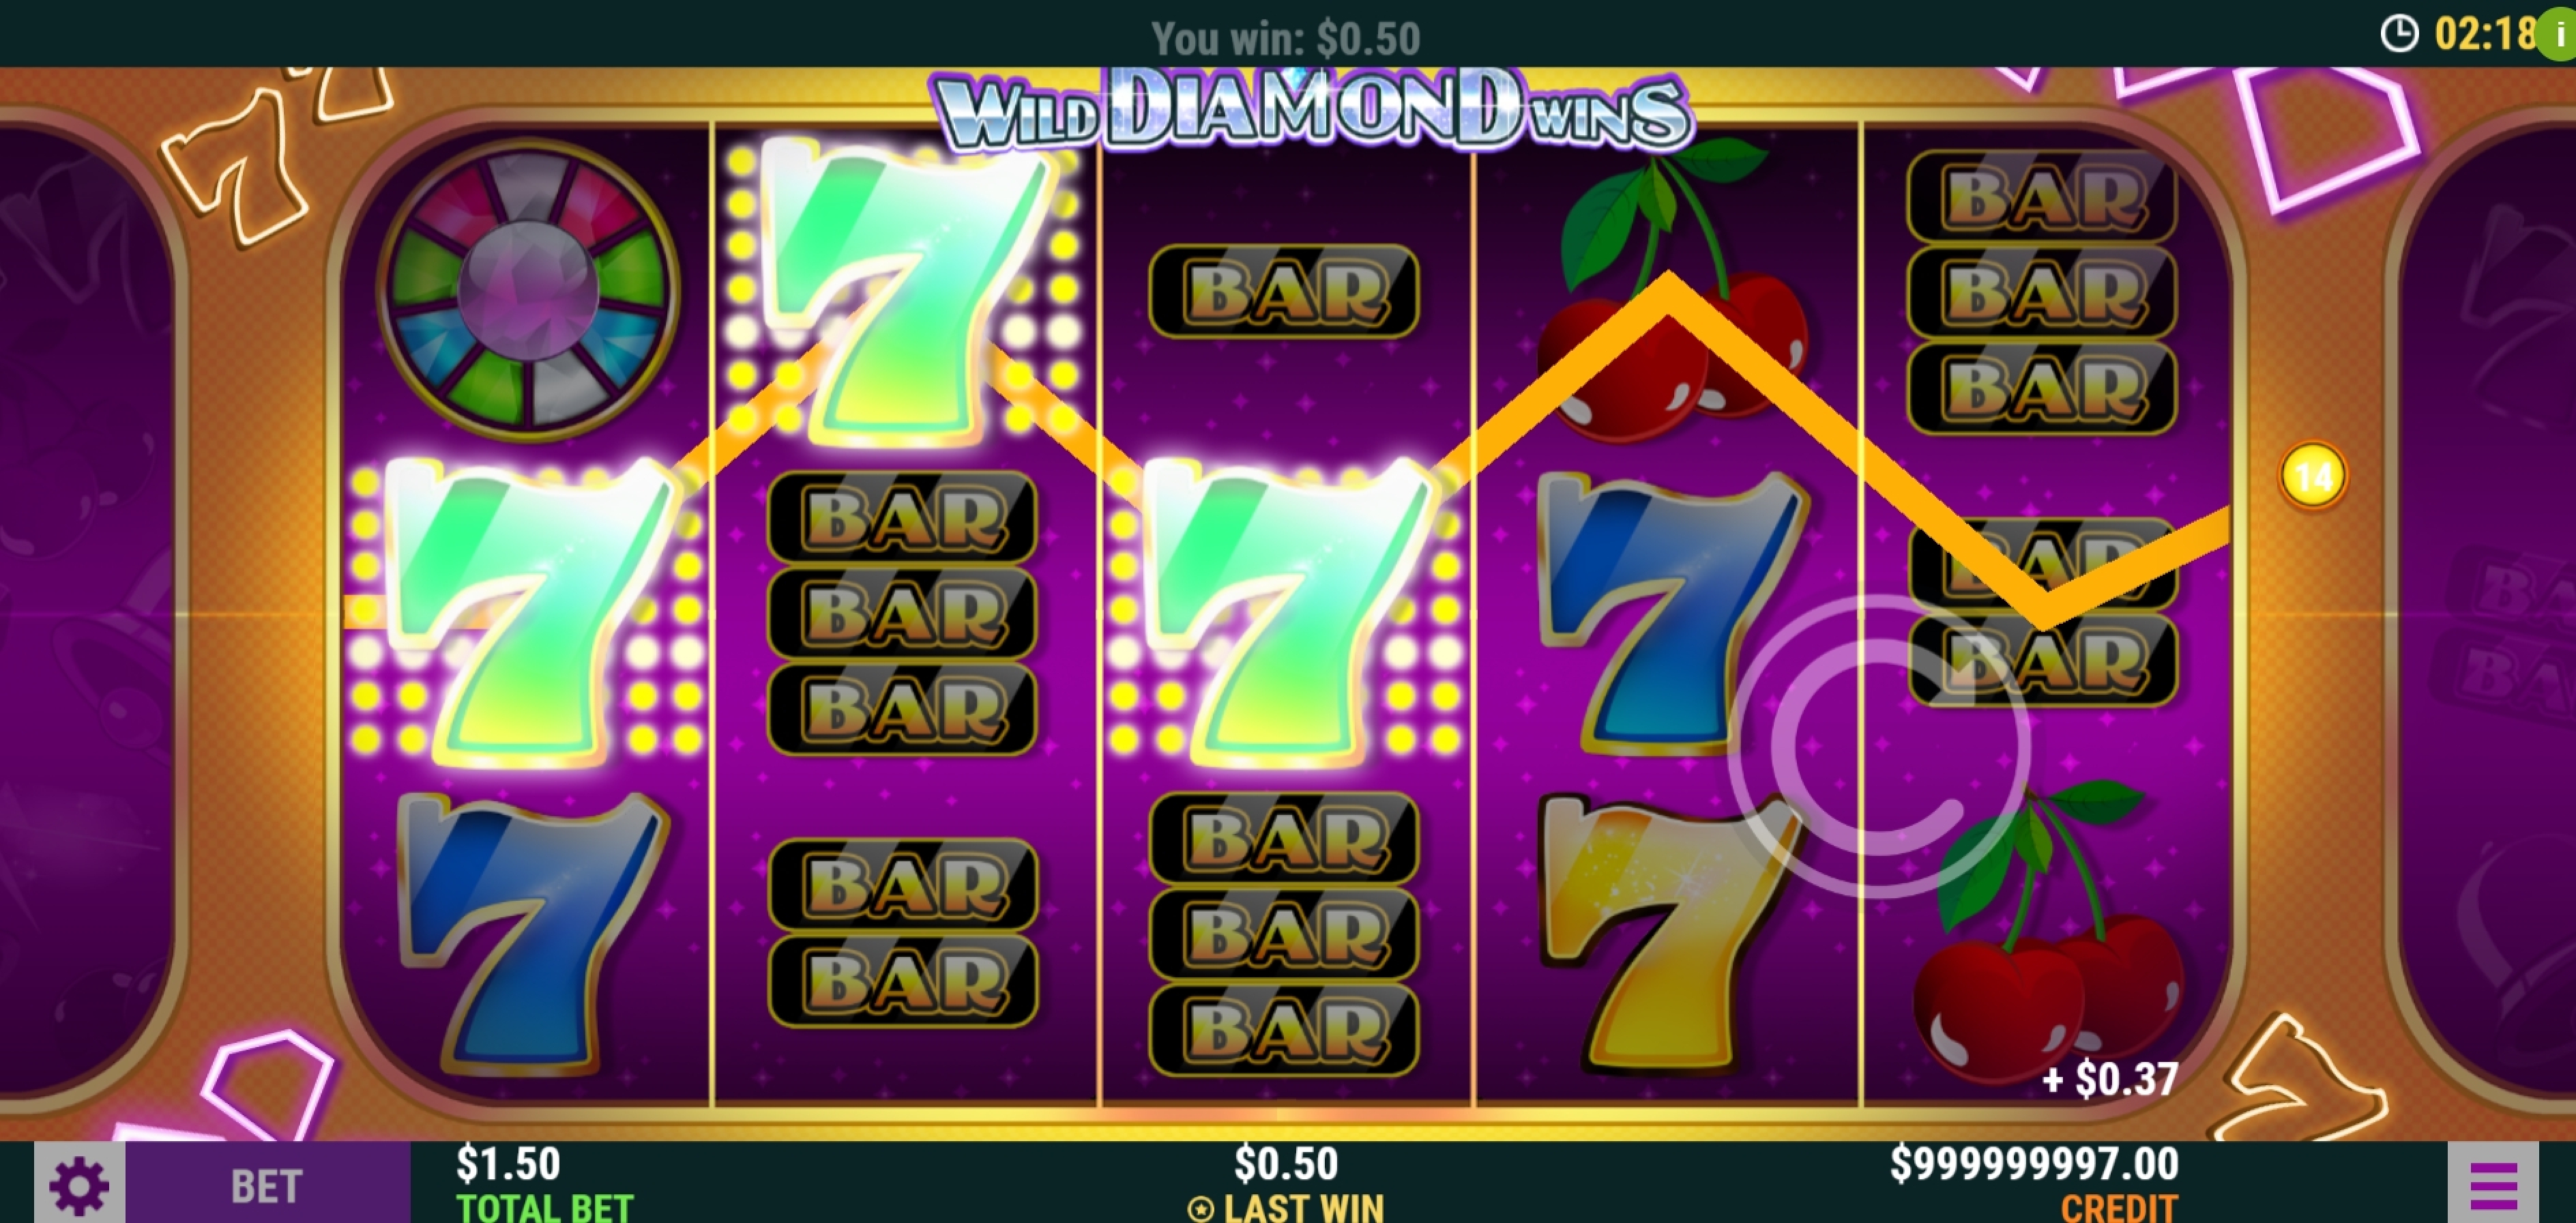 Win Money in Wild Diamond Wins Free Slot Game by Slot Factory